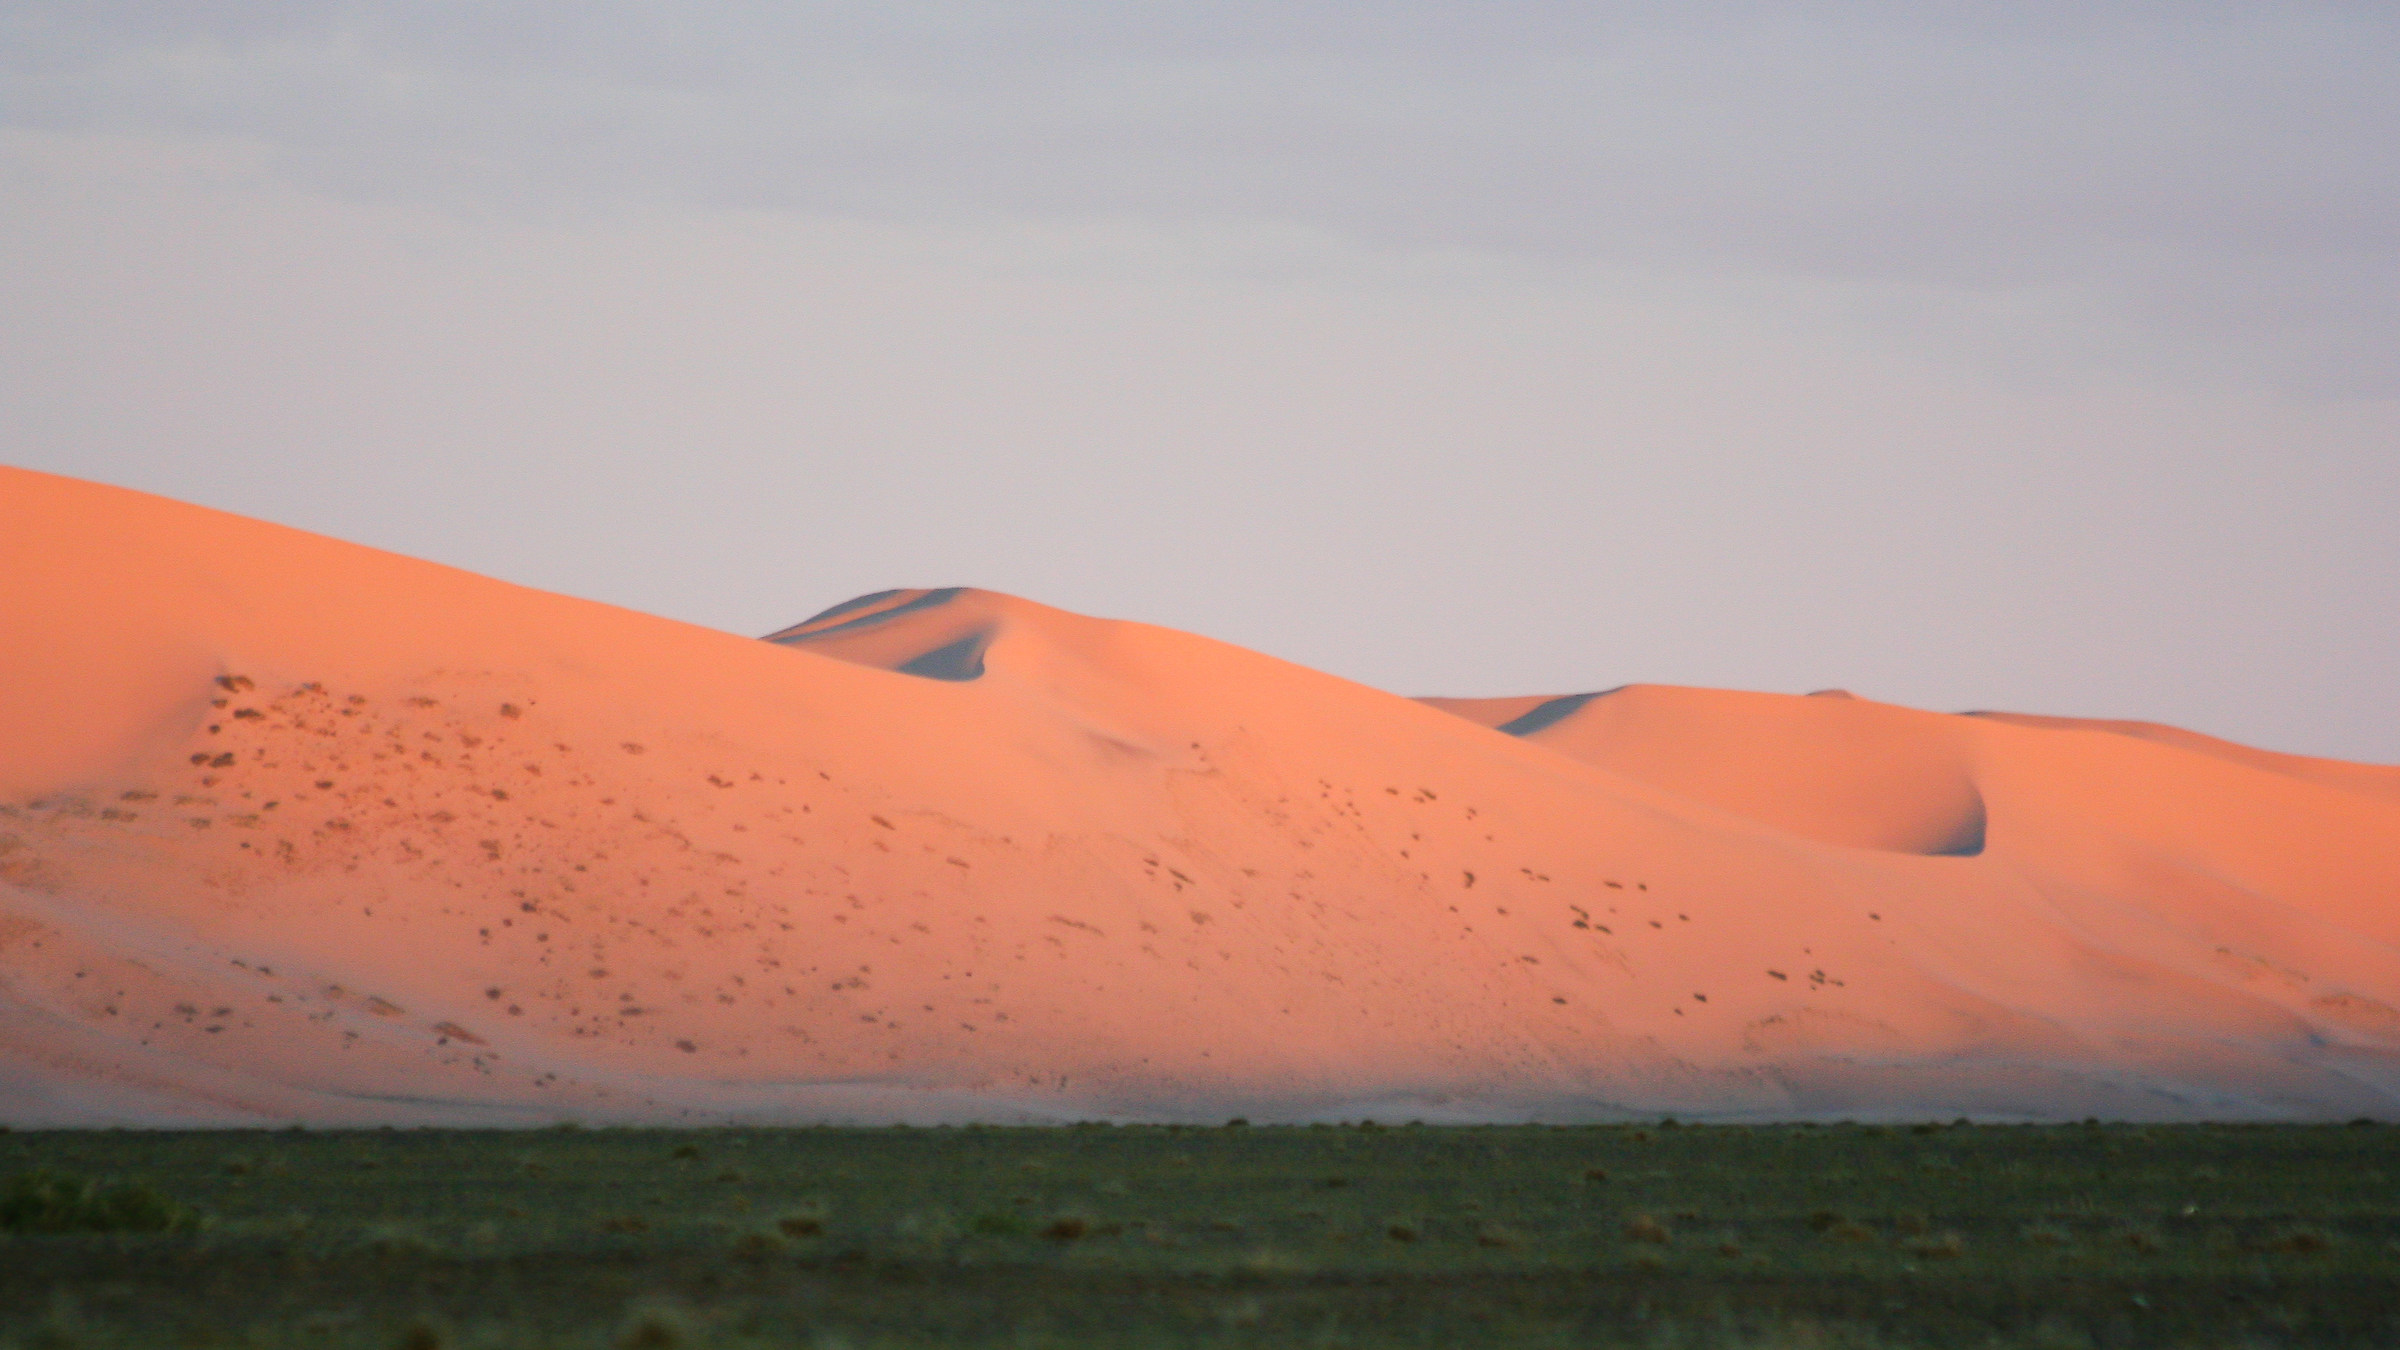 Where the desert meets the steppe...